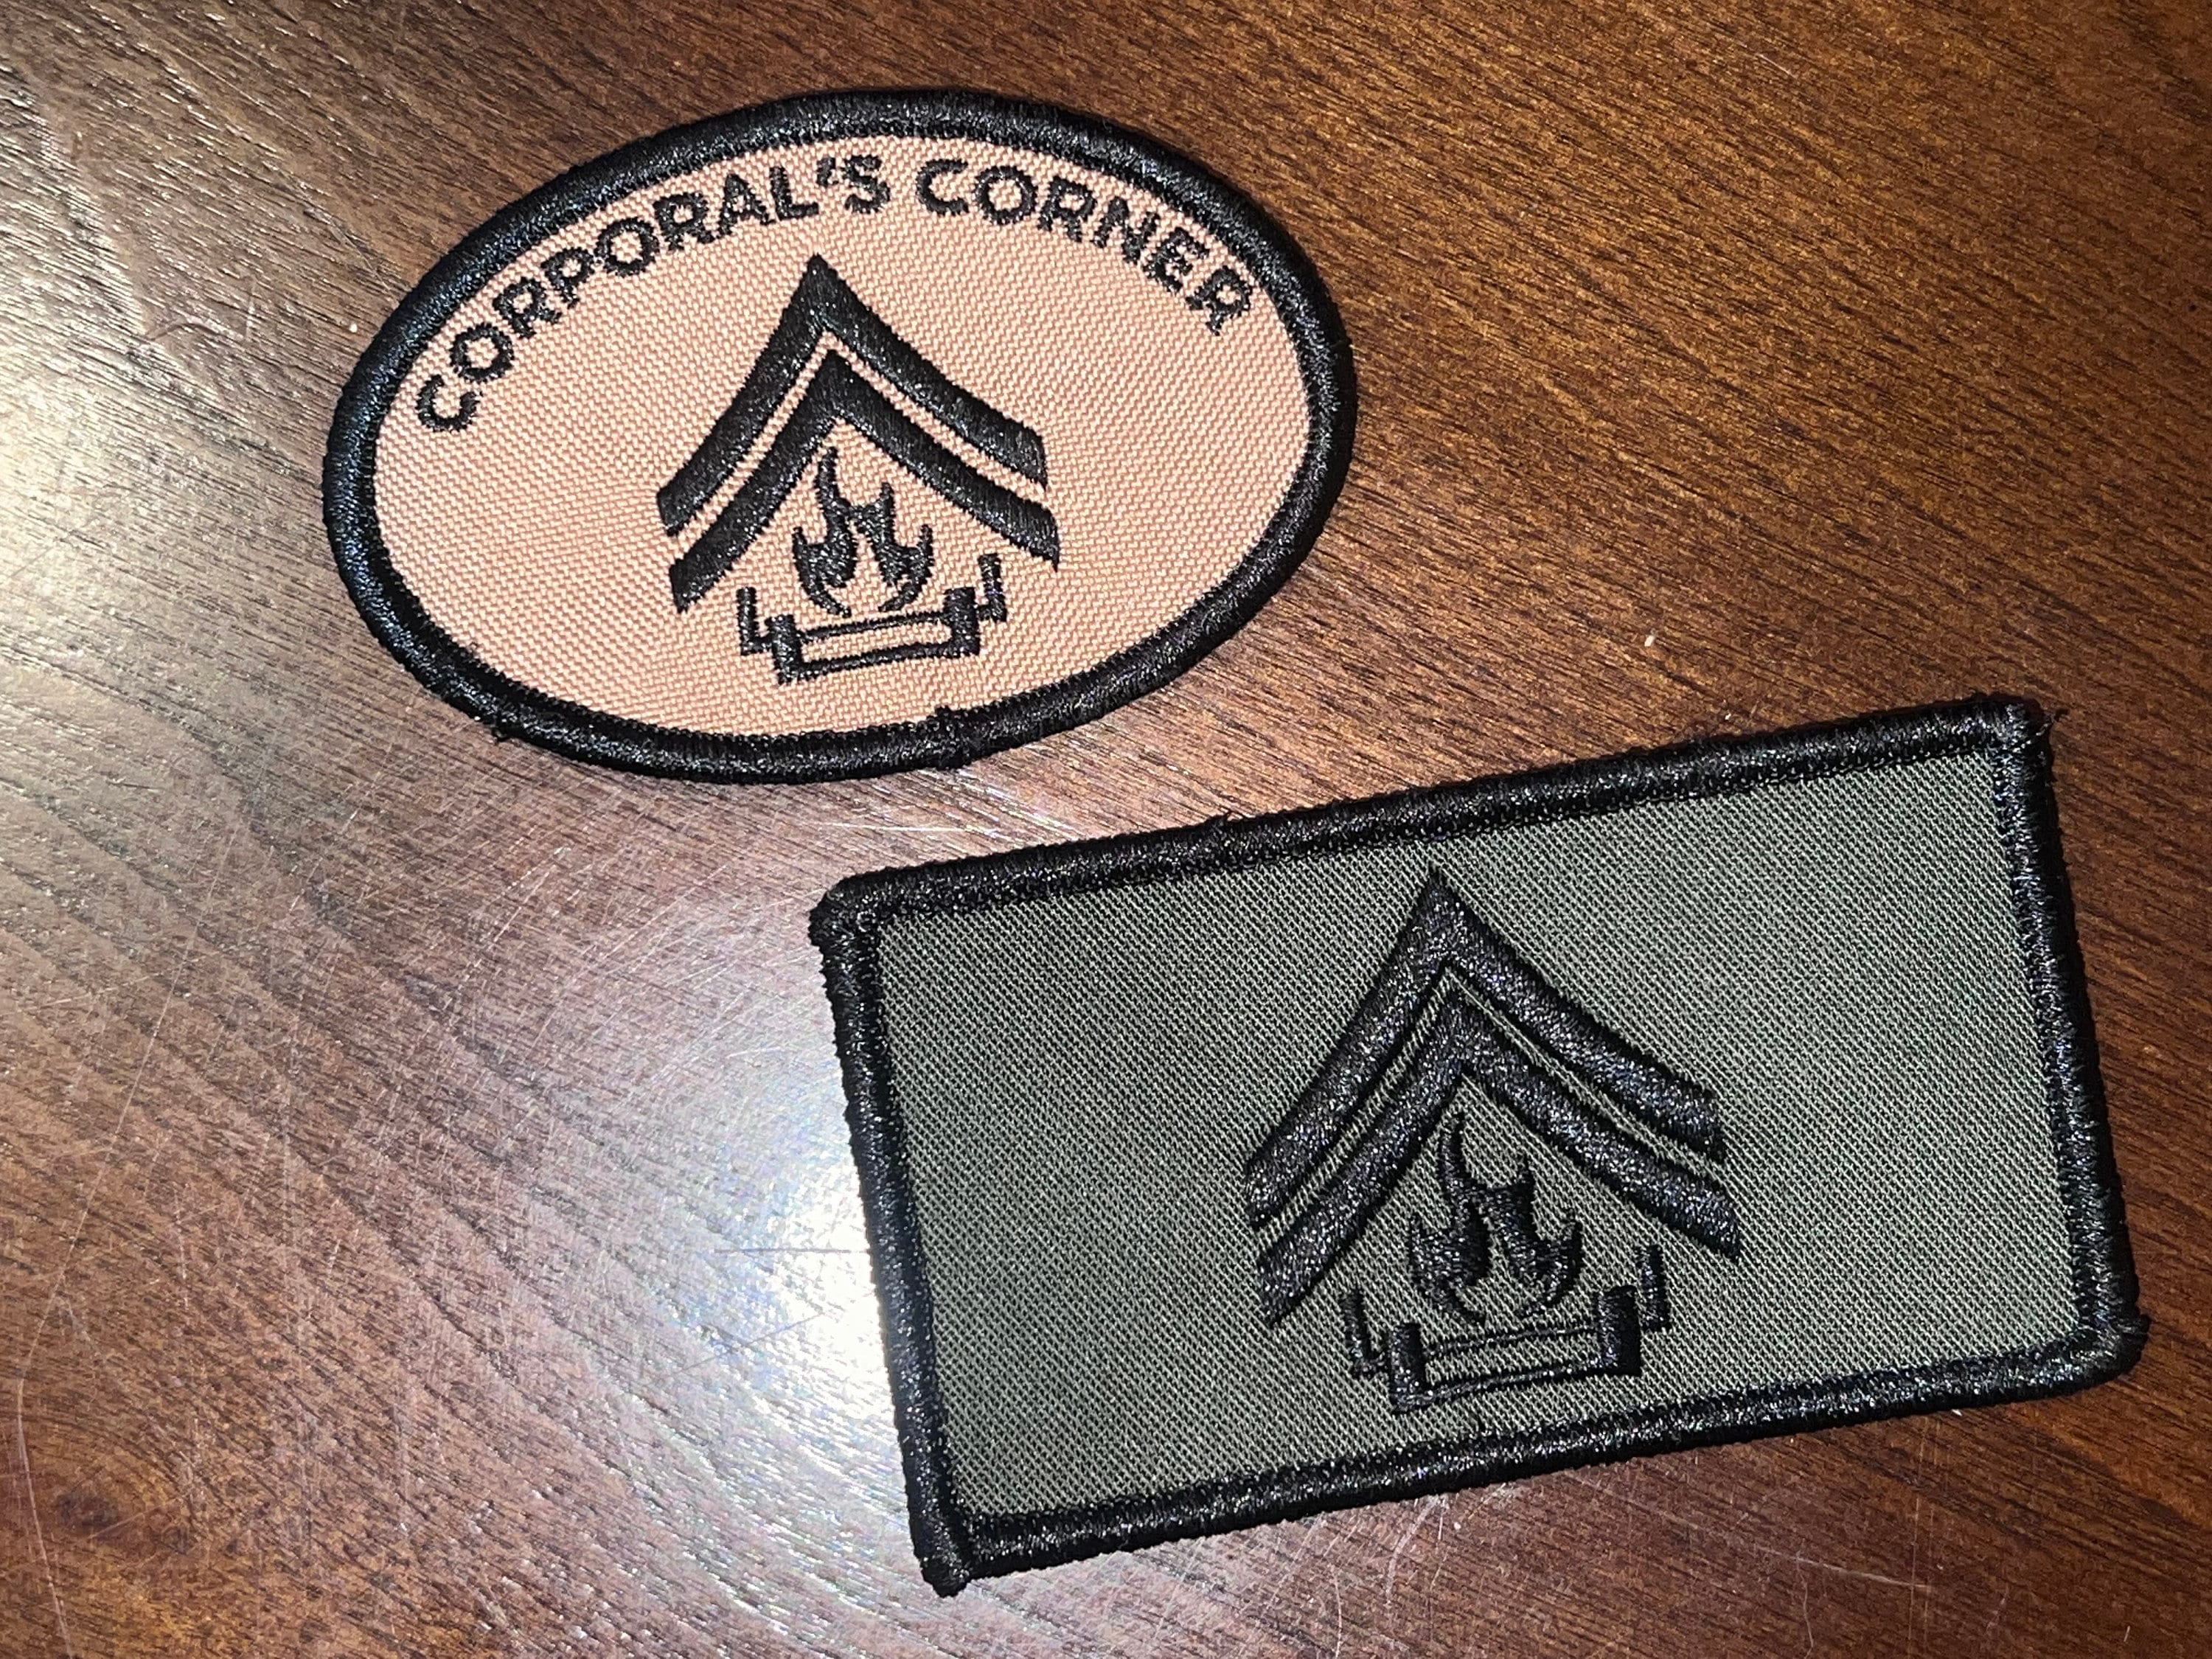 Corporals Corner 2 Patch Combo Pack combine Shipping and Save